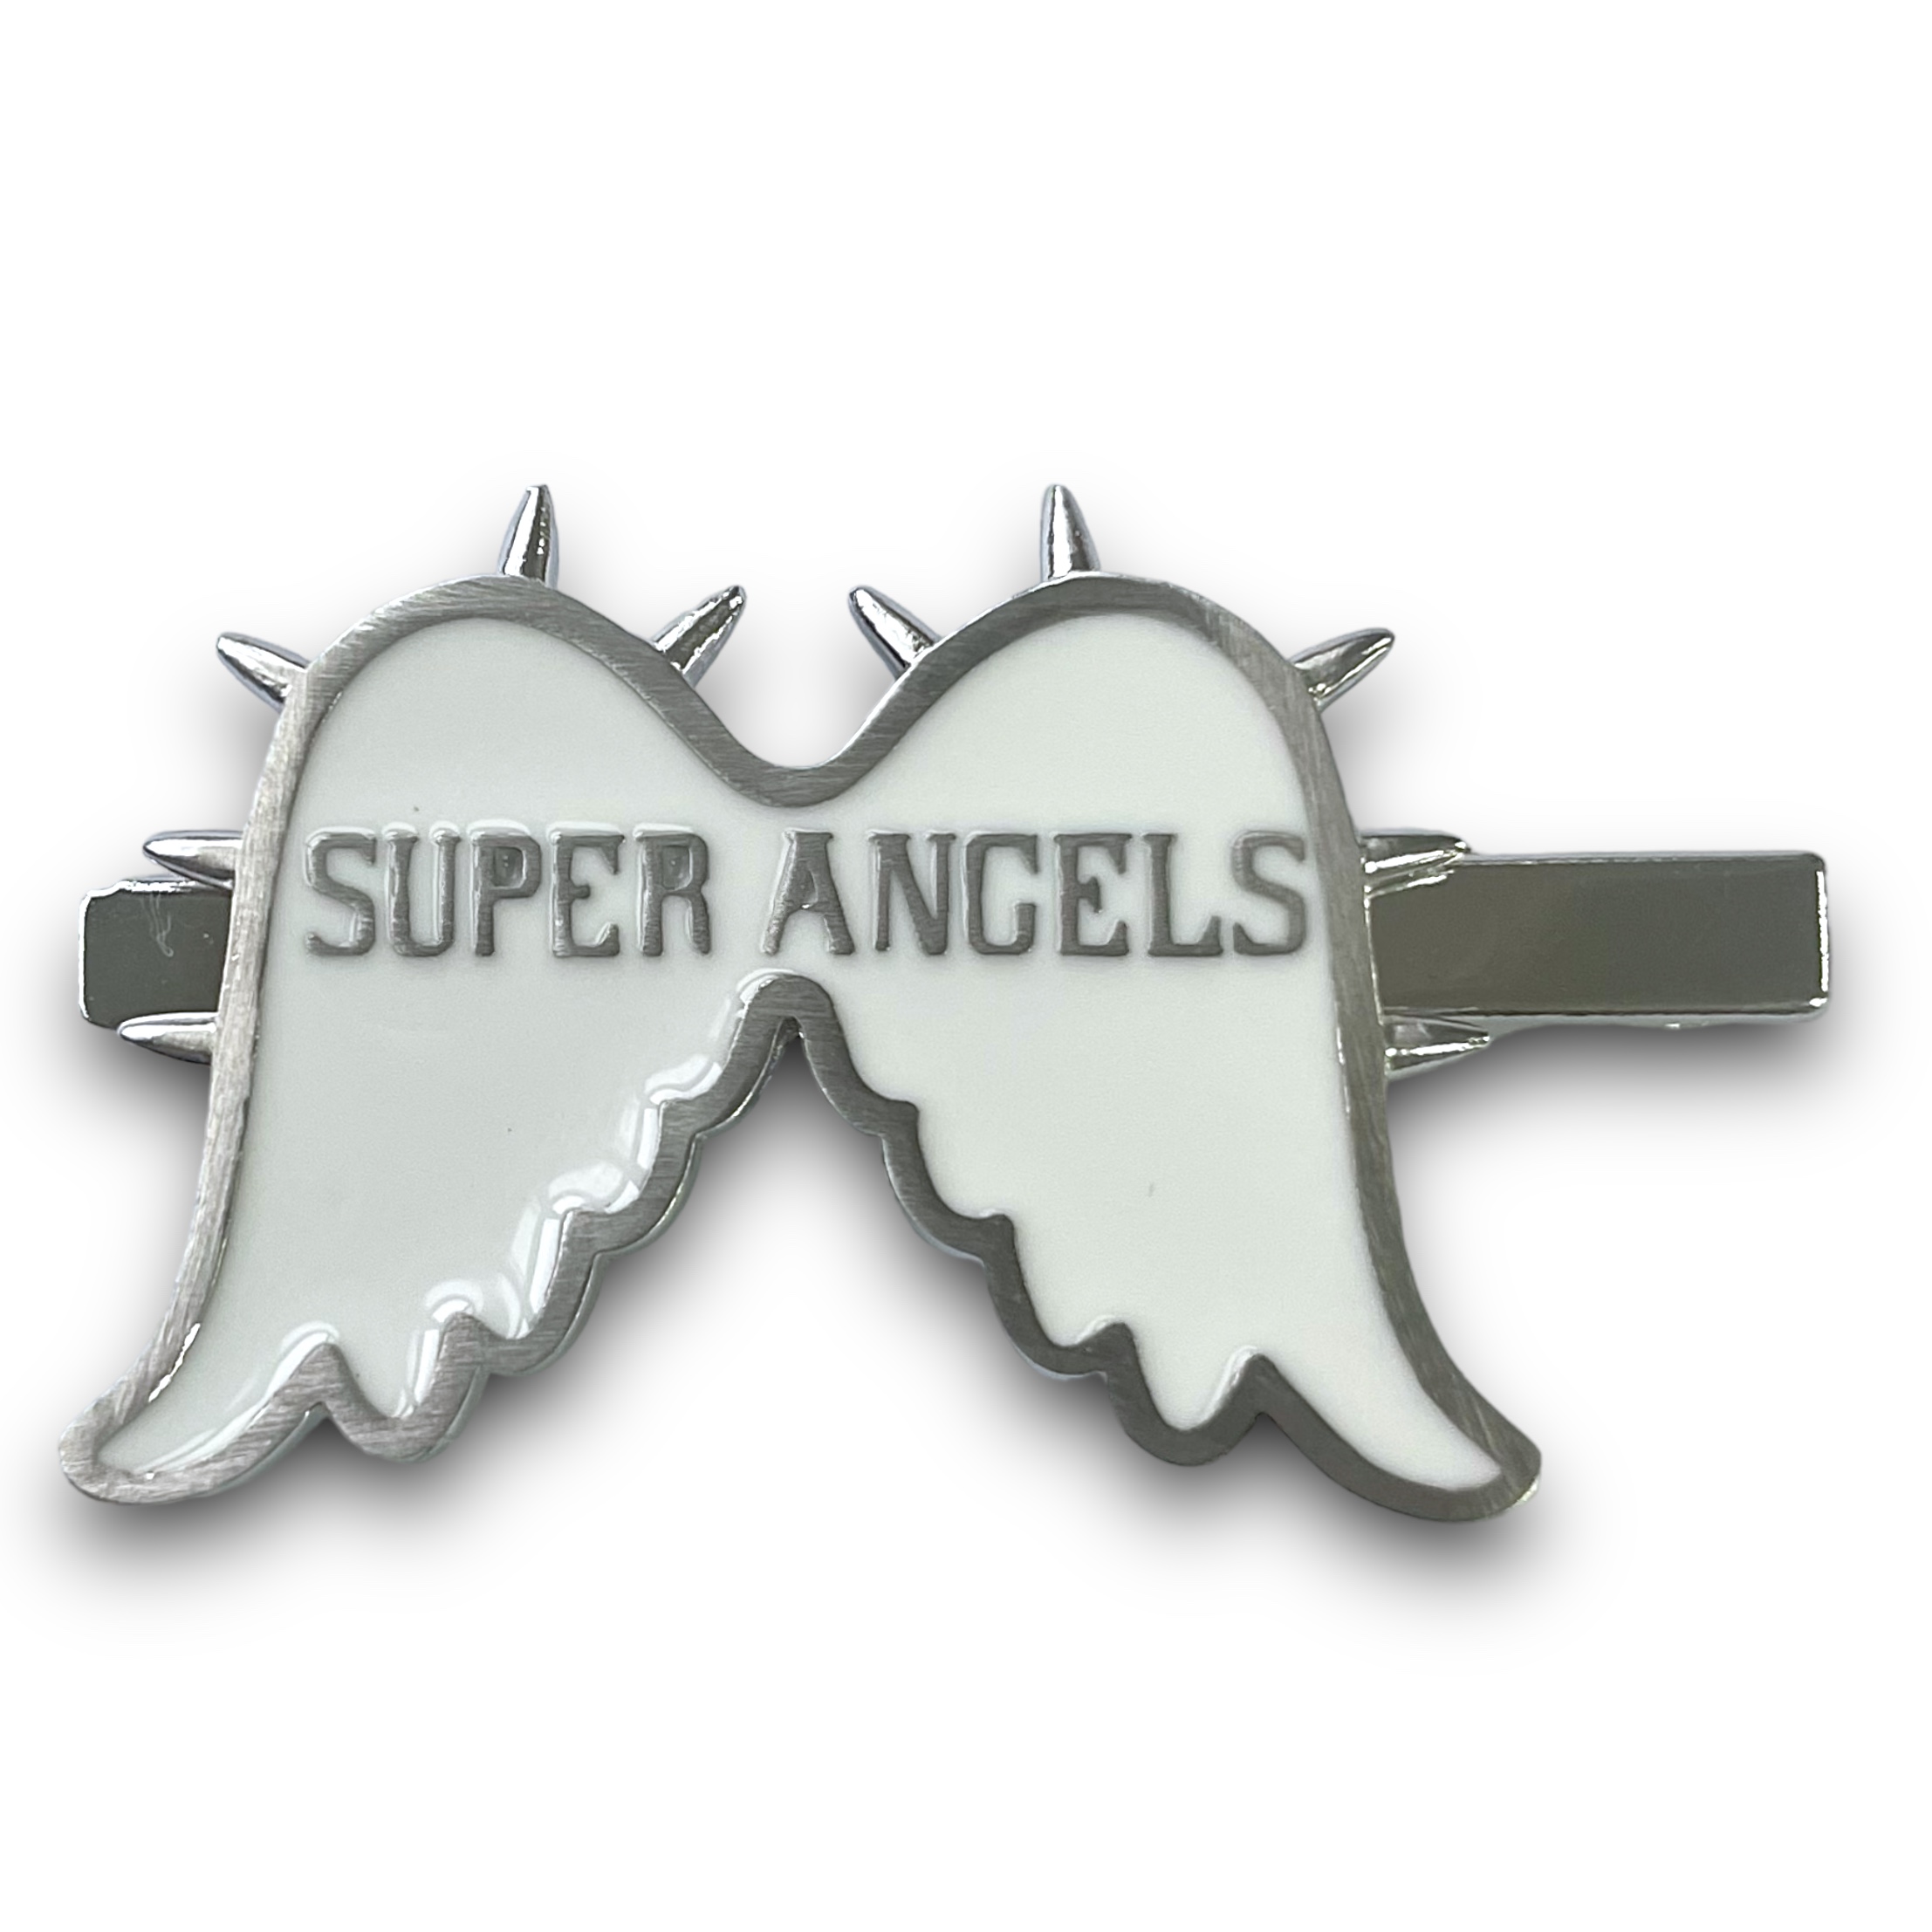 Super Angels Hairpin